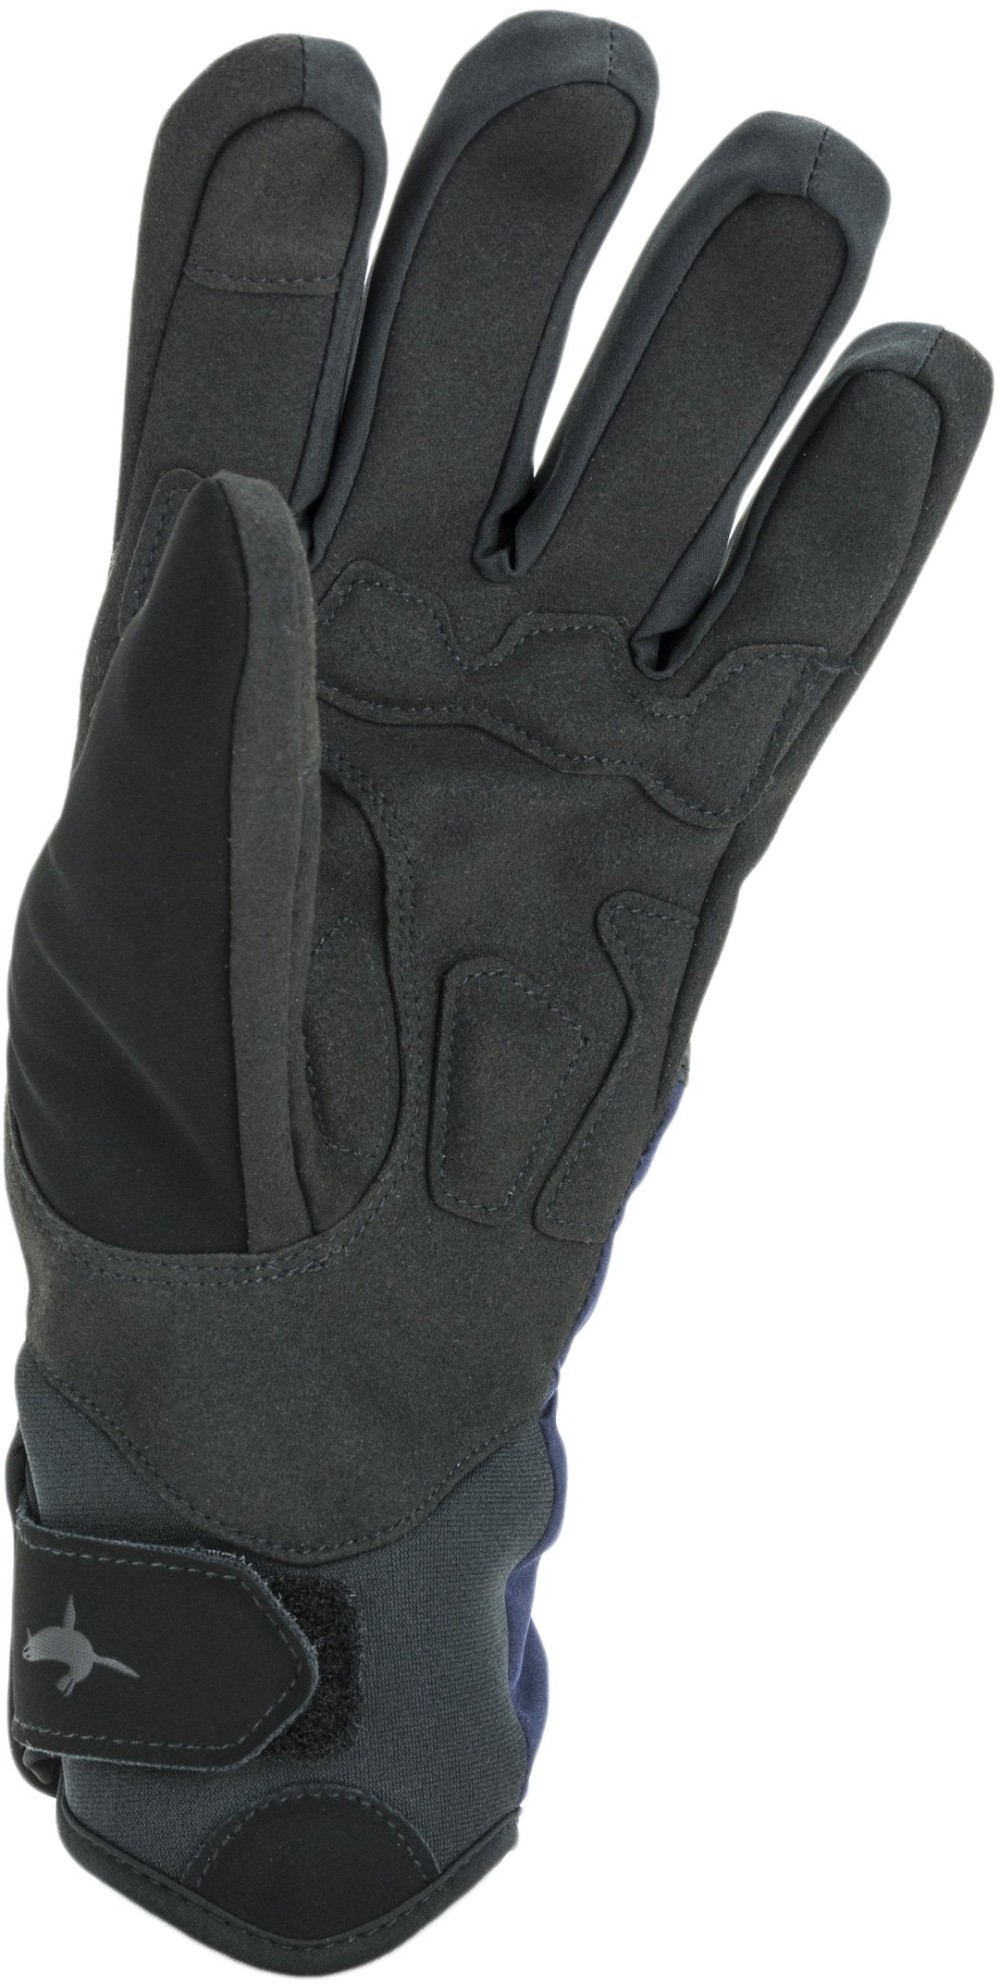 Bodham Waterproof All Weather Long Finger Cycle Gloves image 1